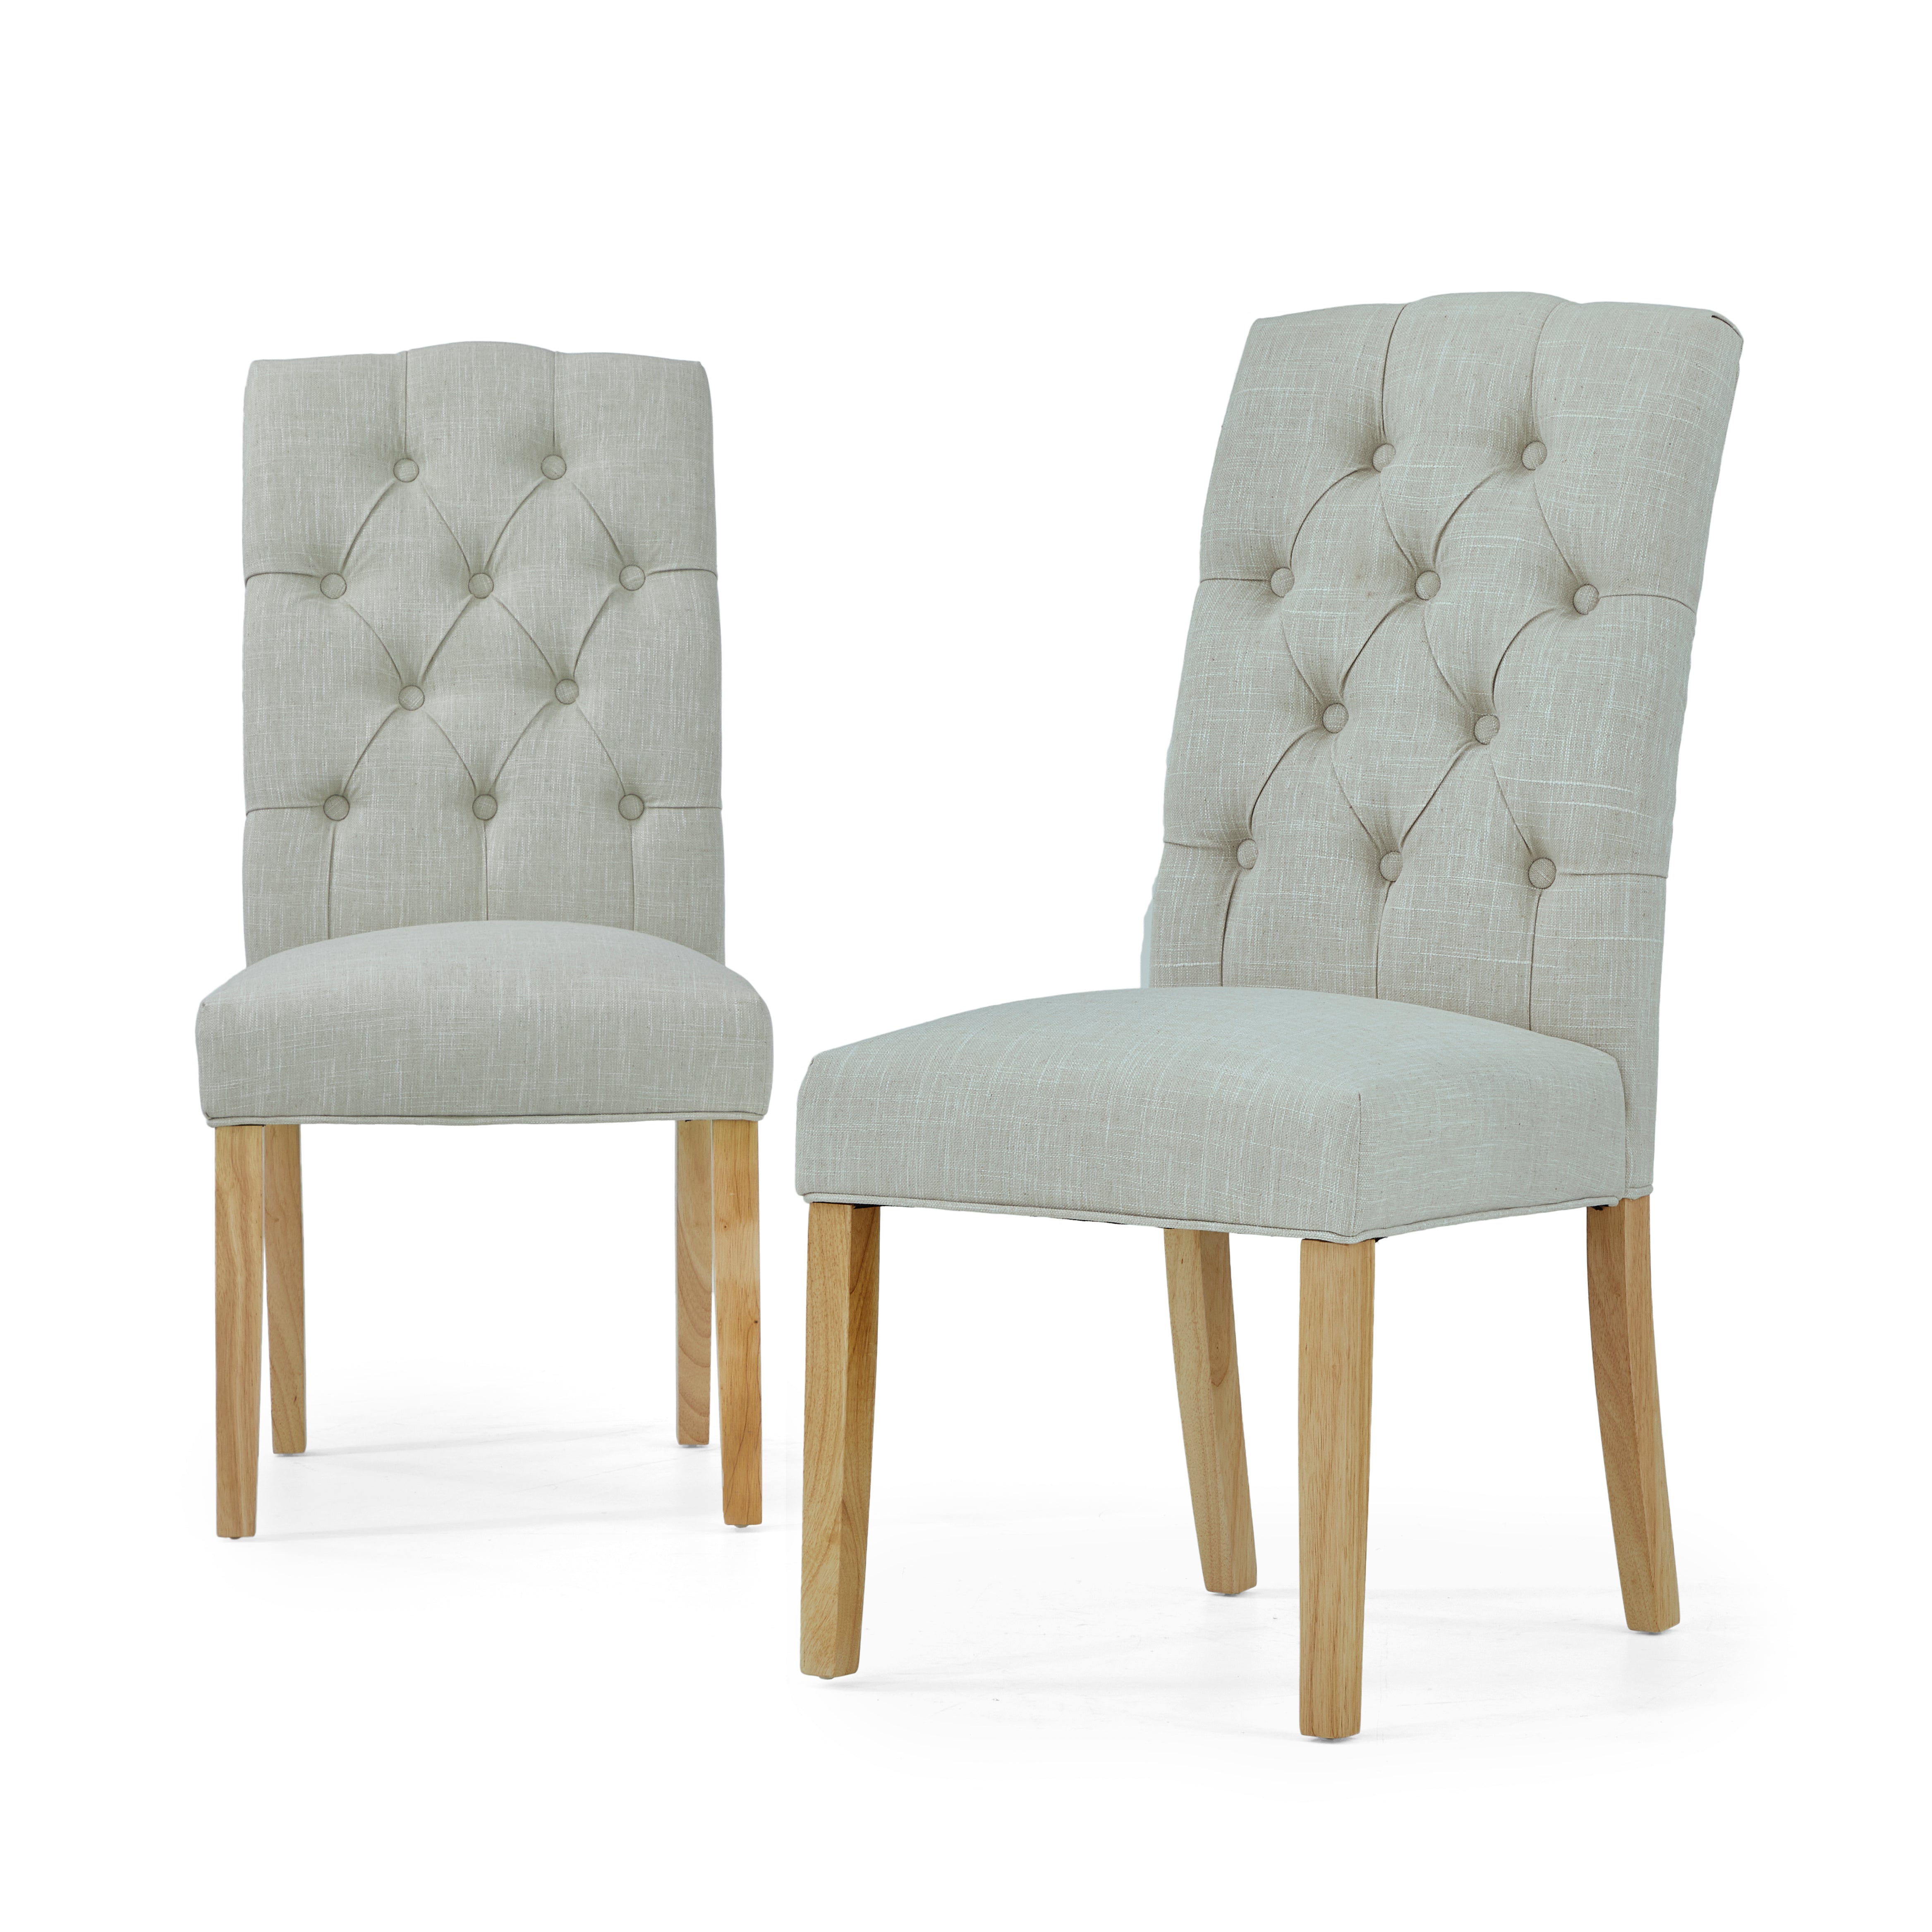 Provence Oak Chelsea Dining Chair Natural.